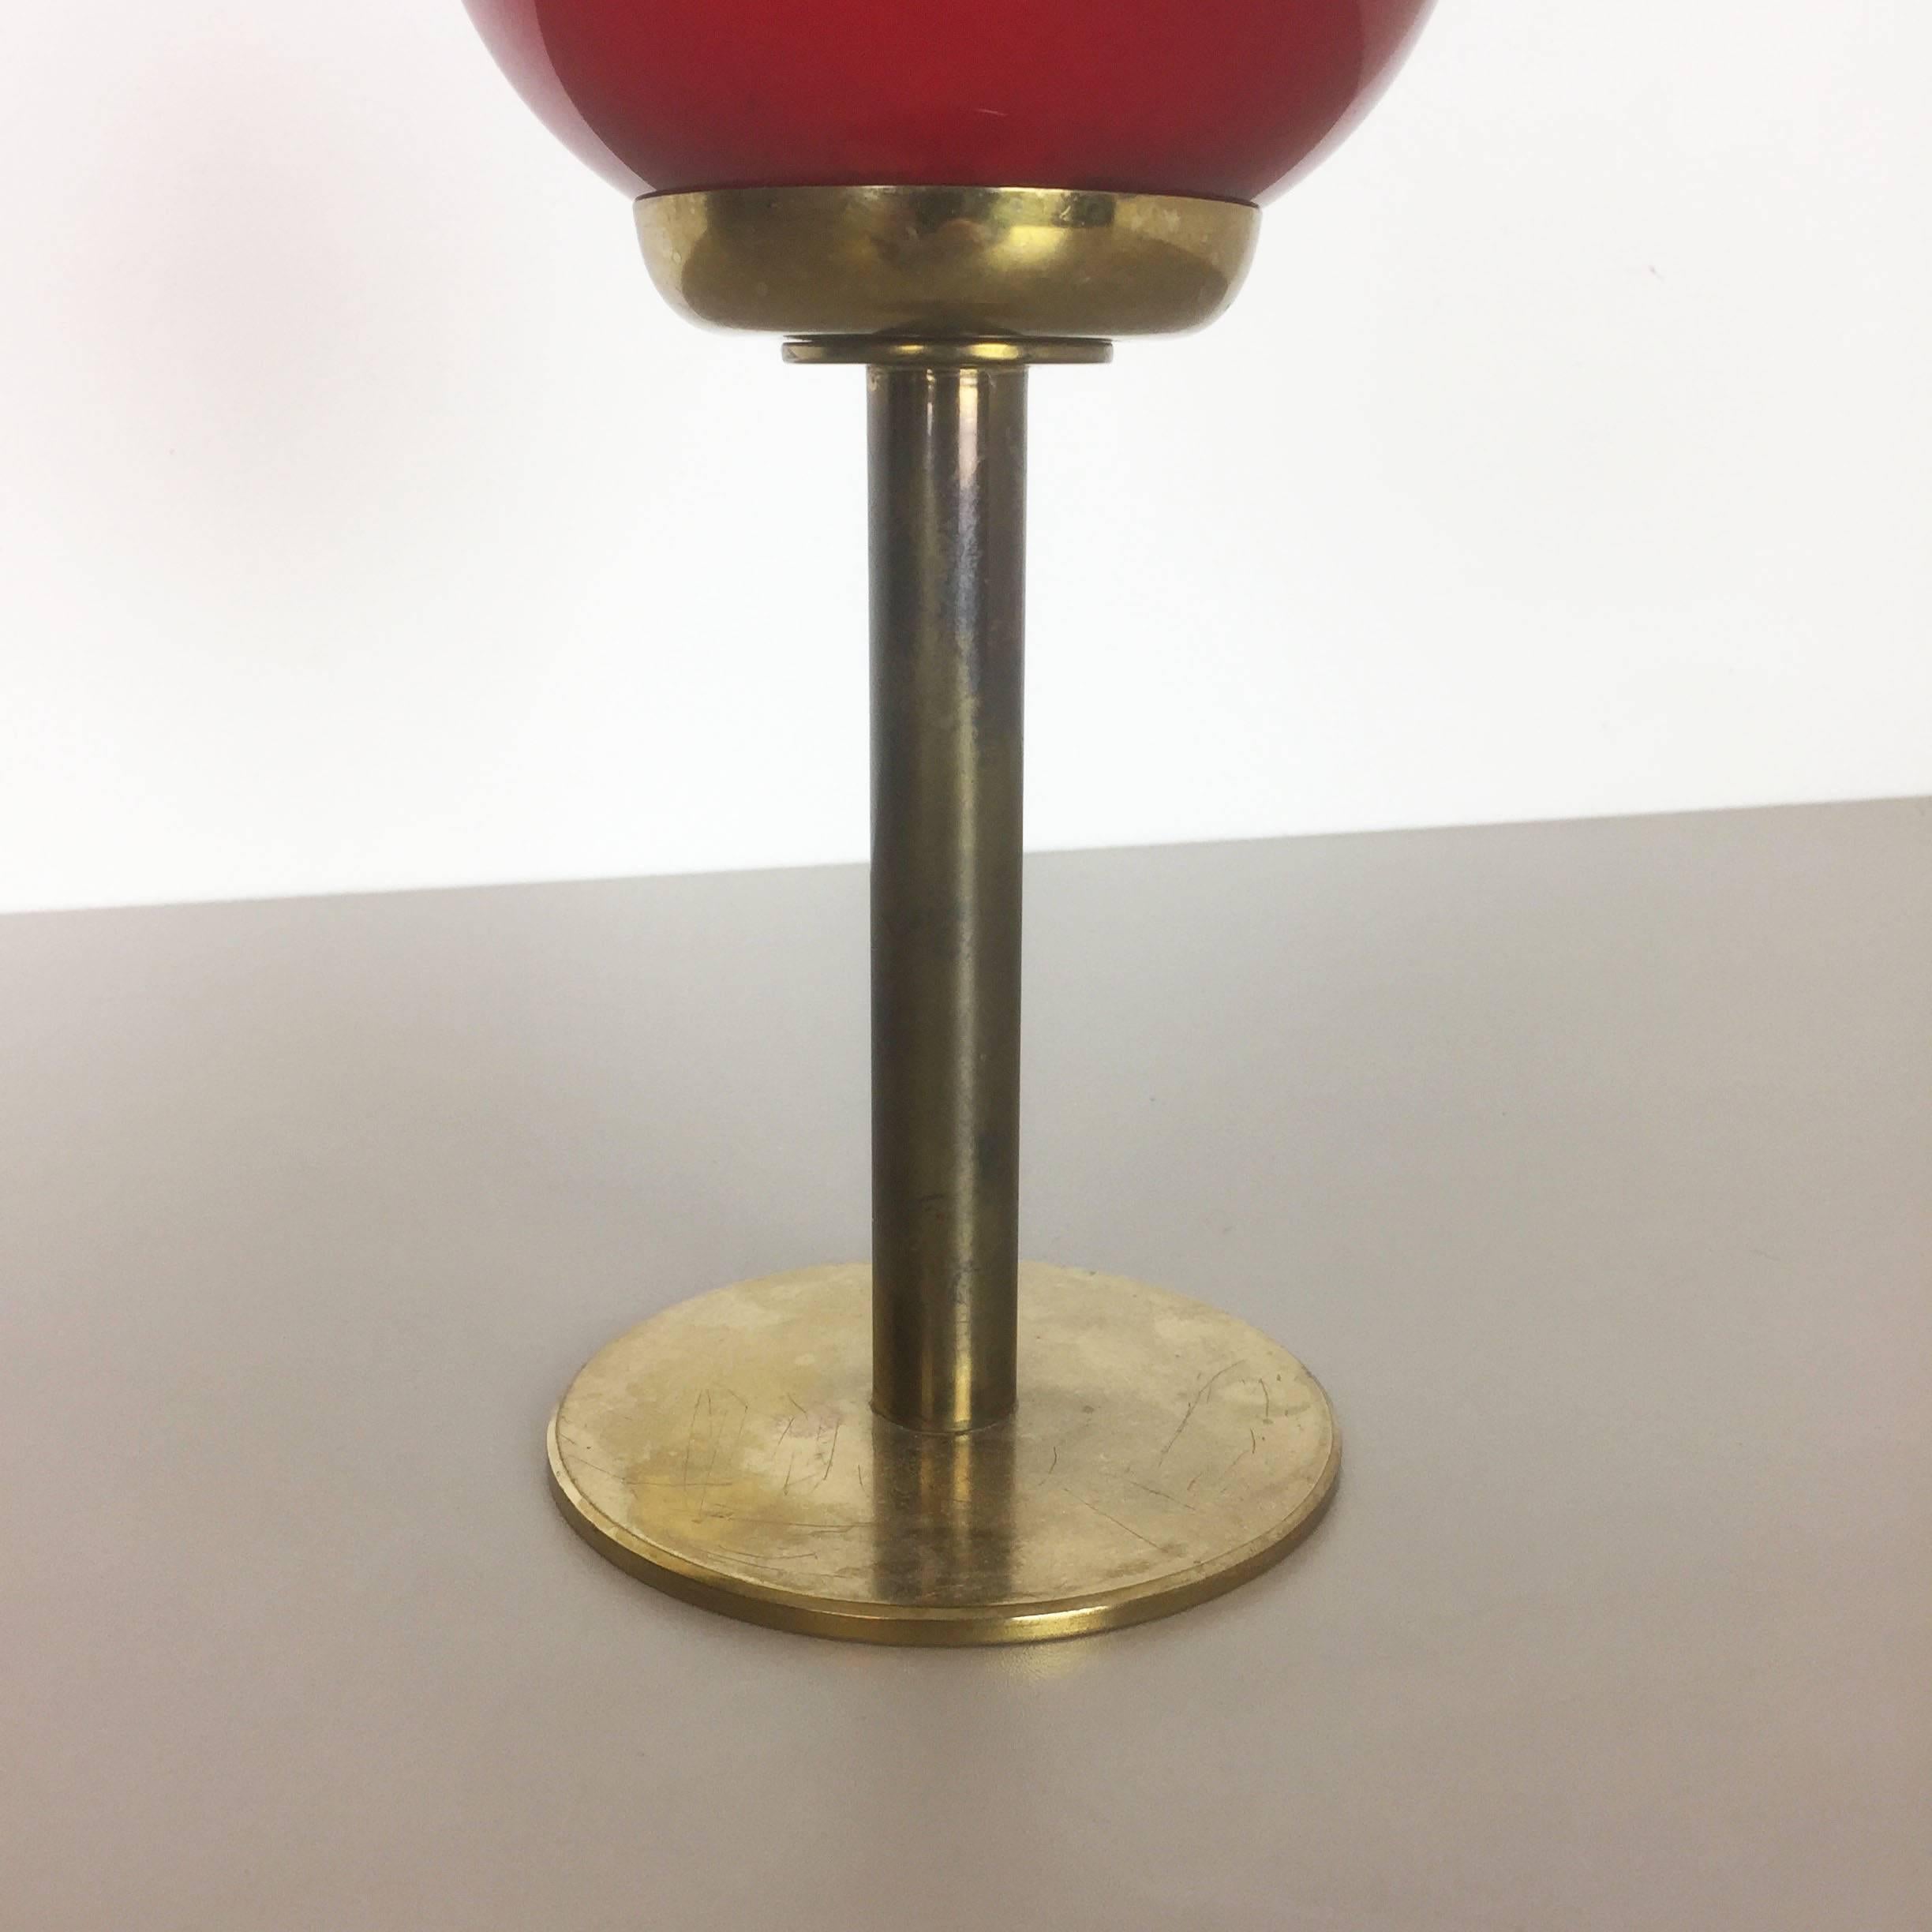 Swedish Vintage Red Glass and Brass CandleHolder by Hans-Agne Jakobsson, Sweden, 1950s